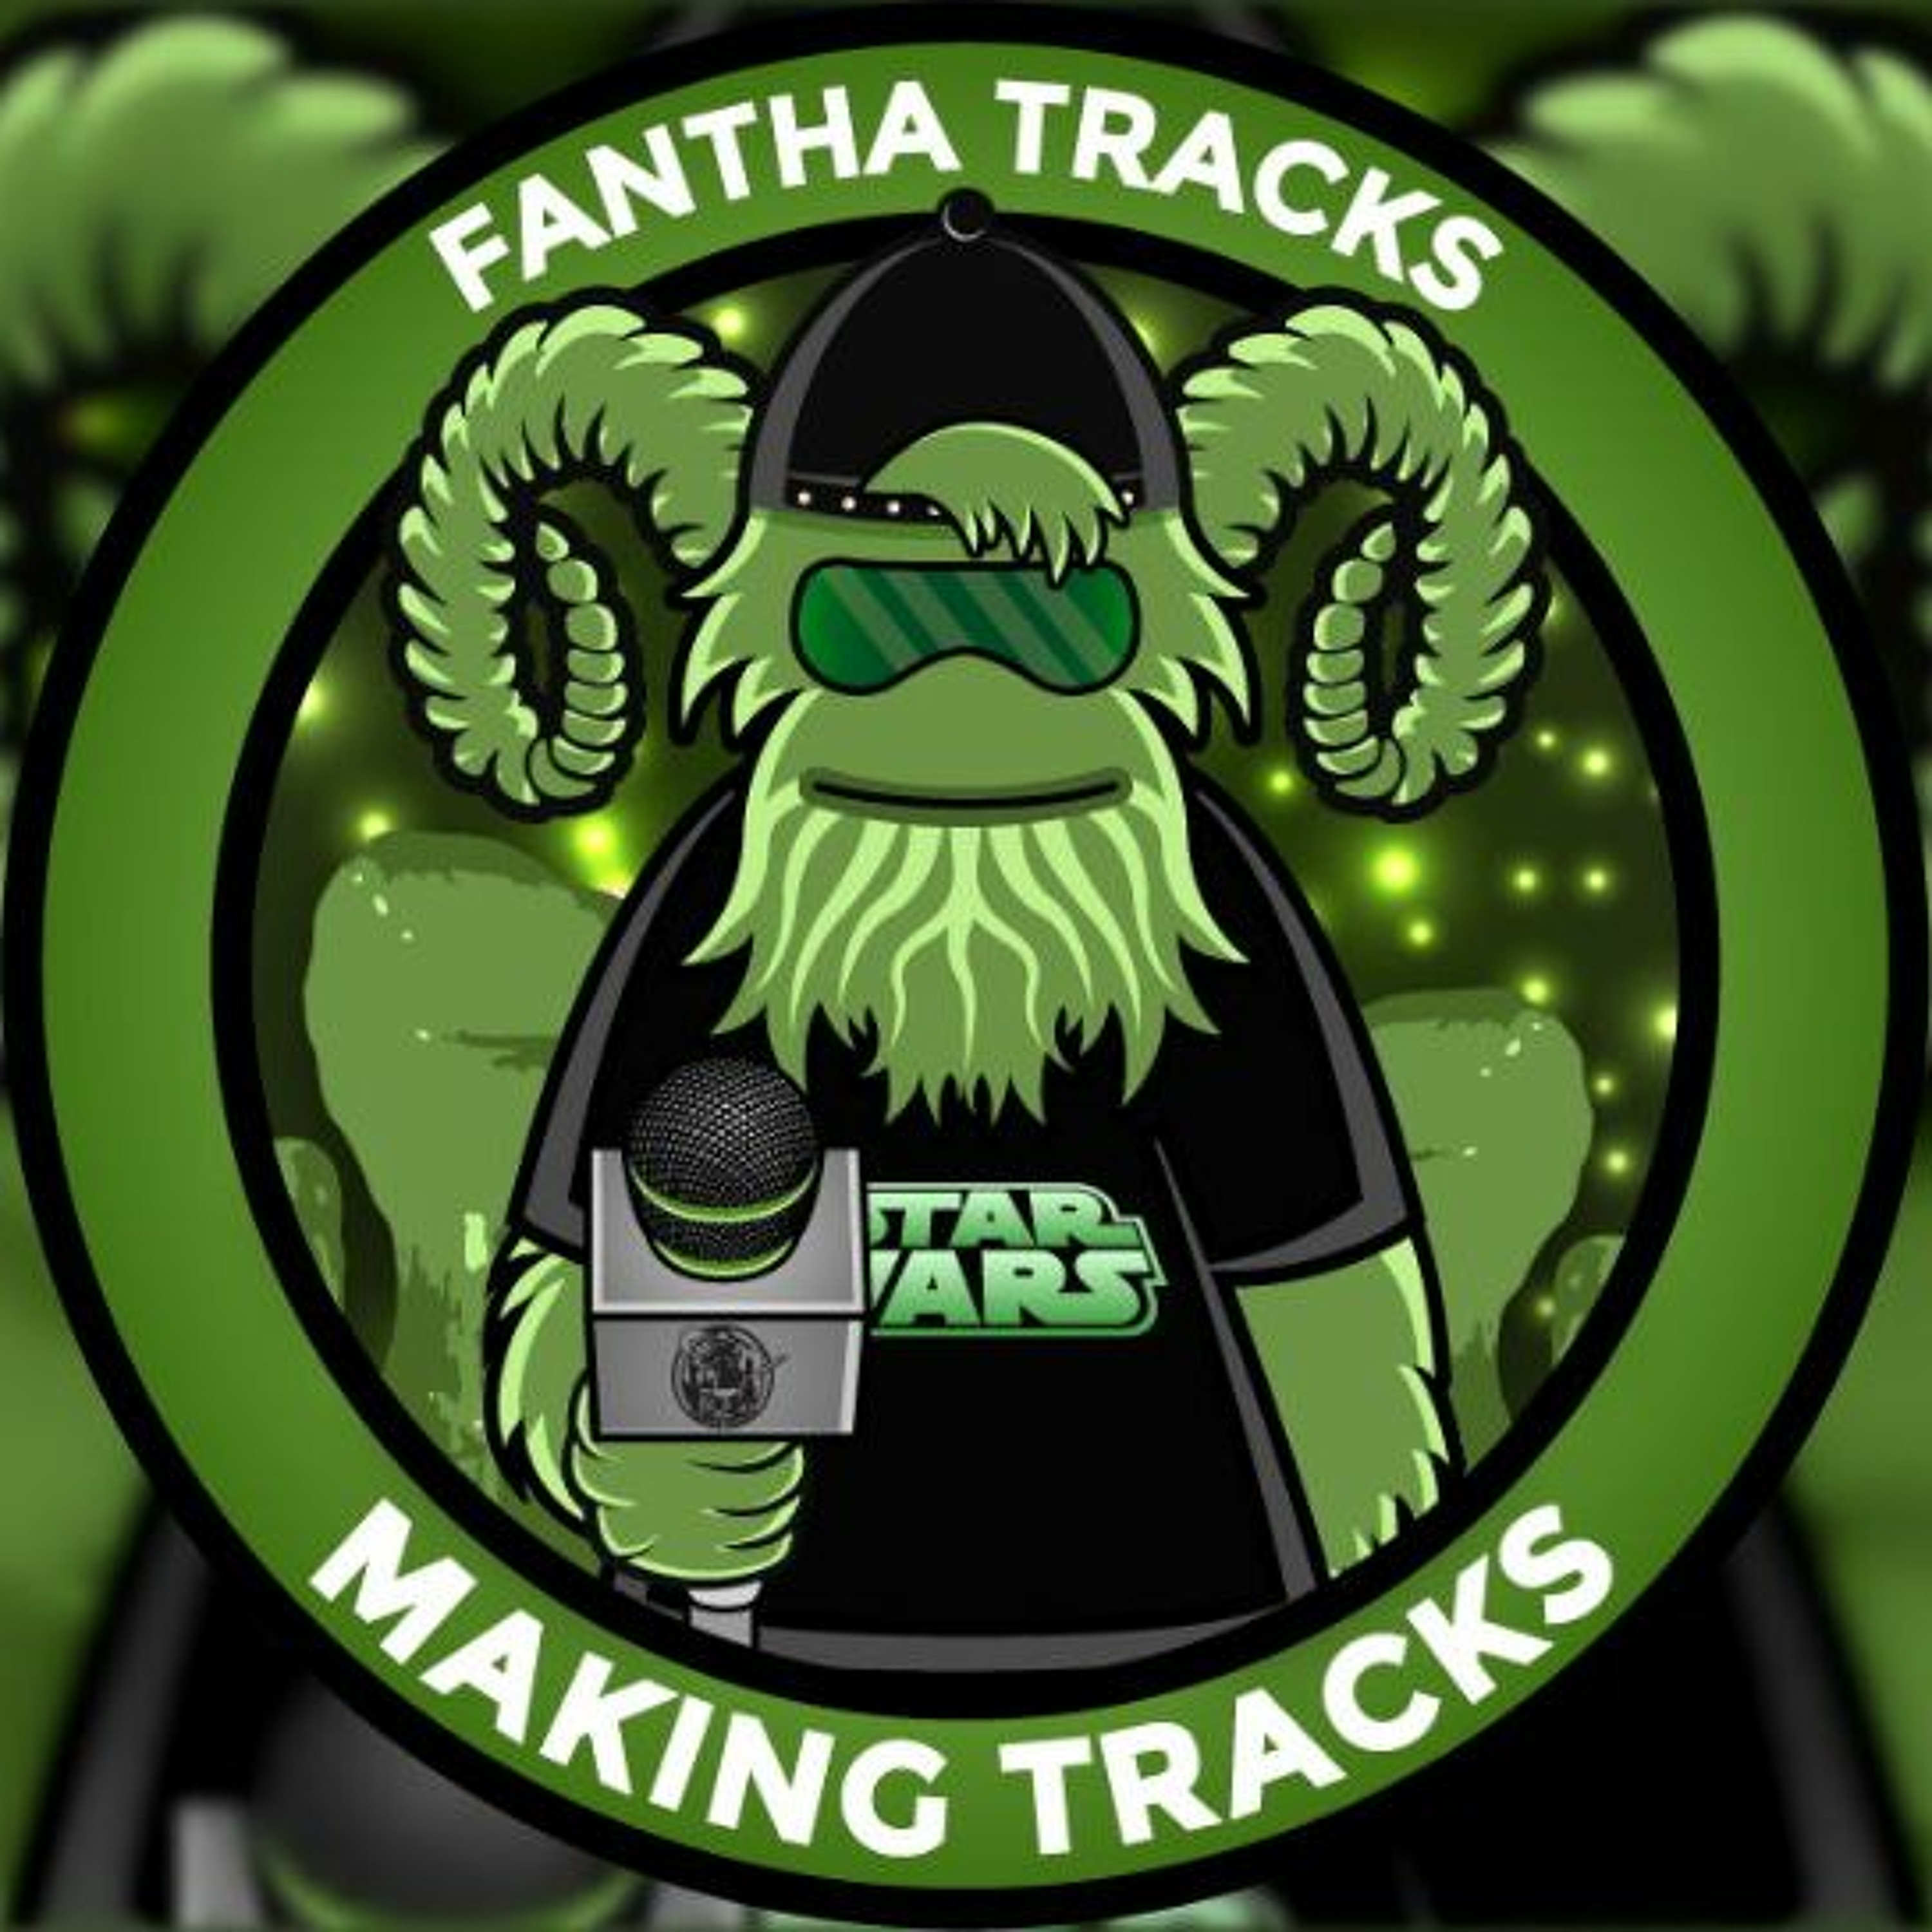 Making Tracks Episode 41: ”I’m not 100% sure how we’re gonna do this” - with our guest Hal Hickel